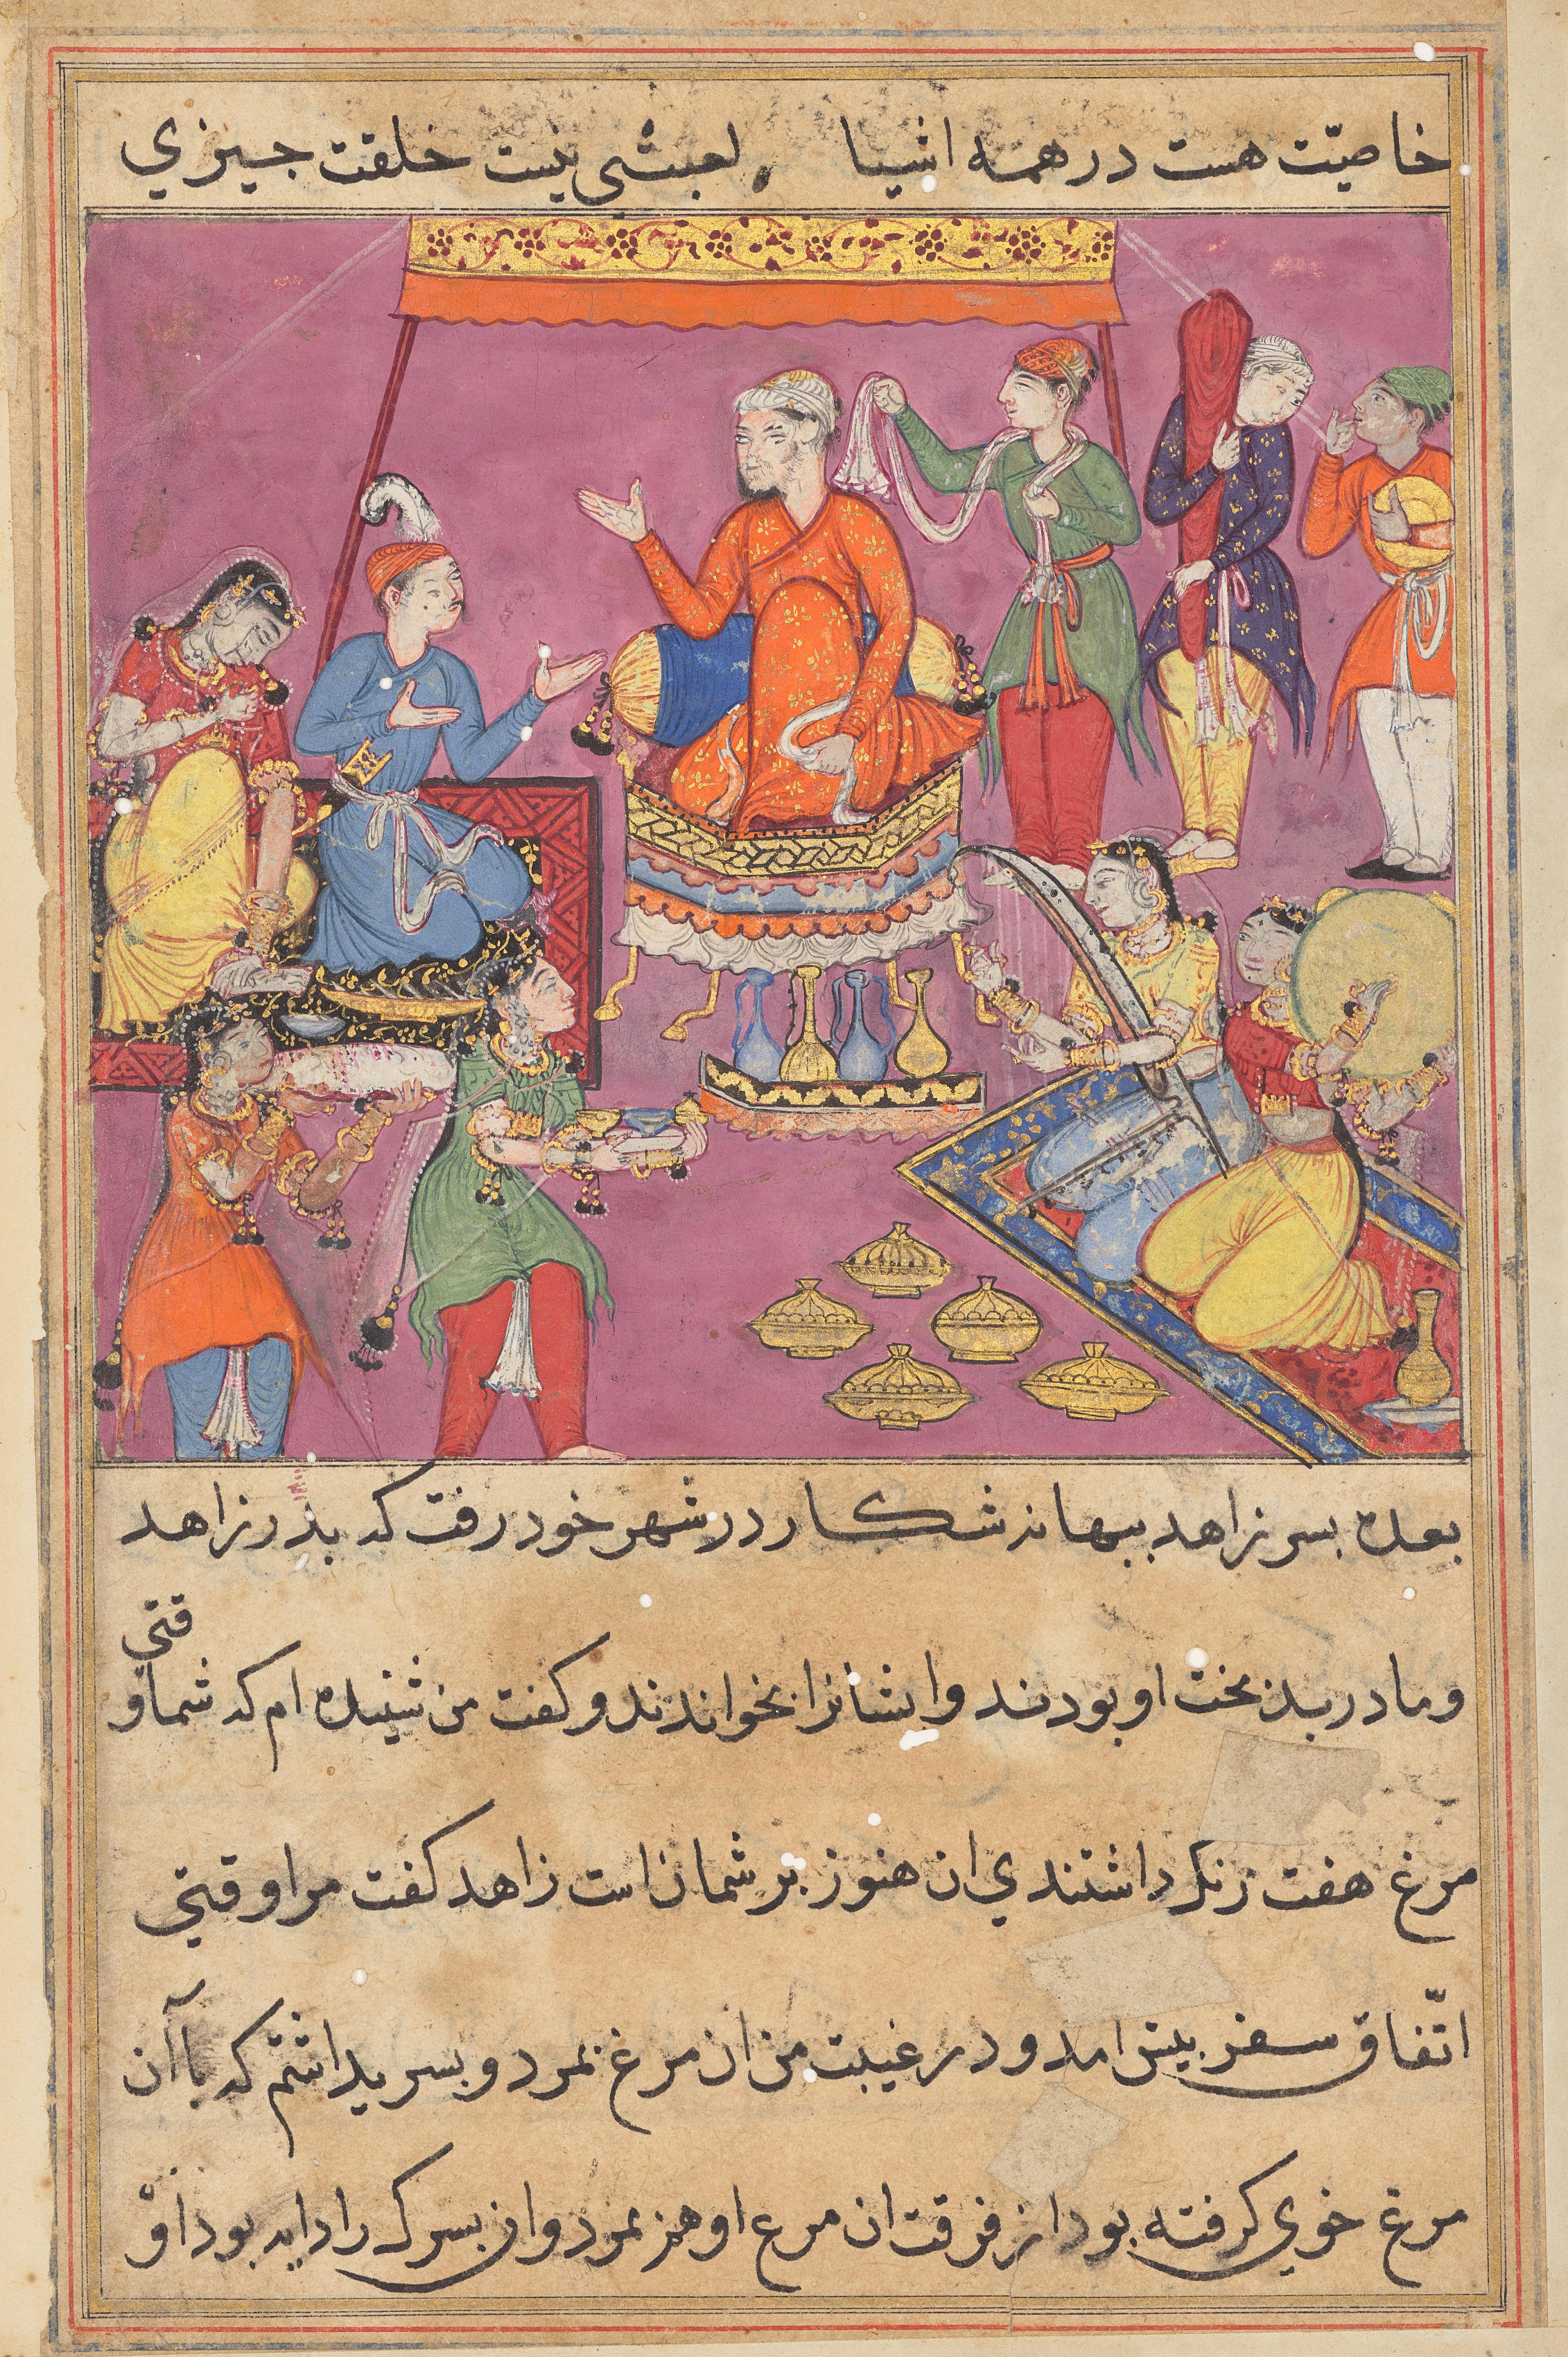 The king gives his daughter in marriage to the pious man’s son, from a Tuti-nama (Tales of a Parrot): Fifty-second Night